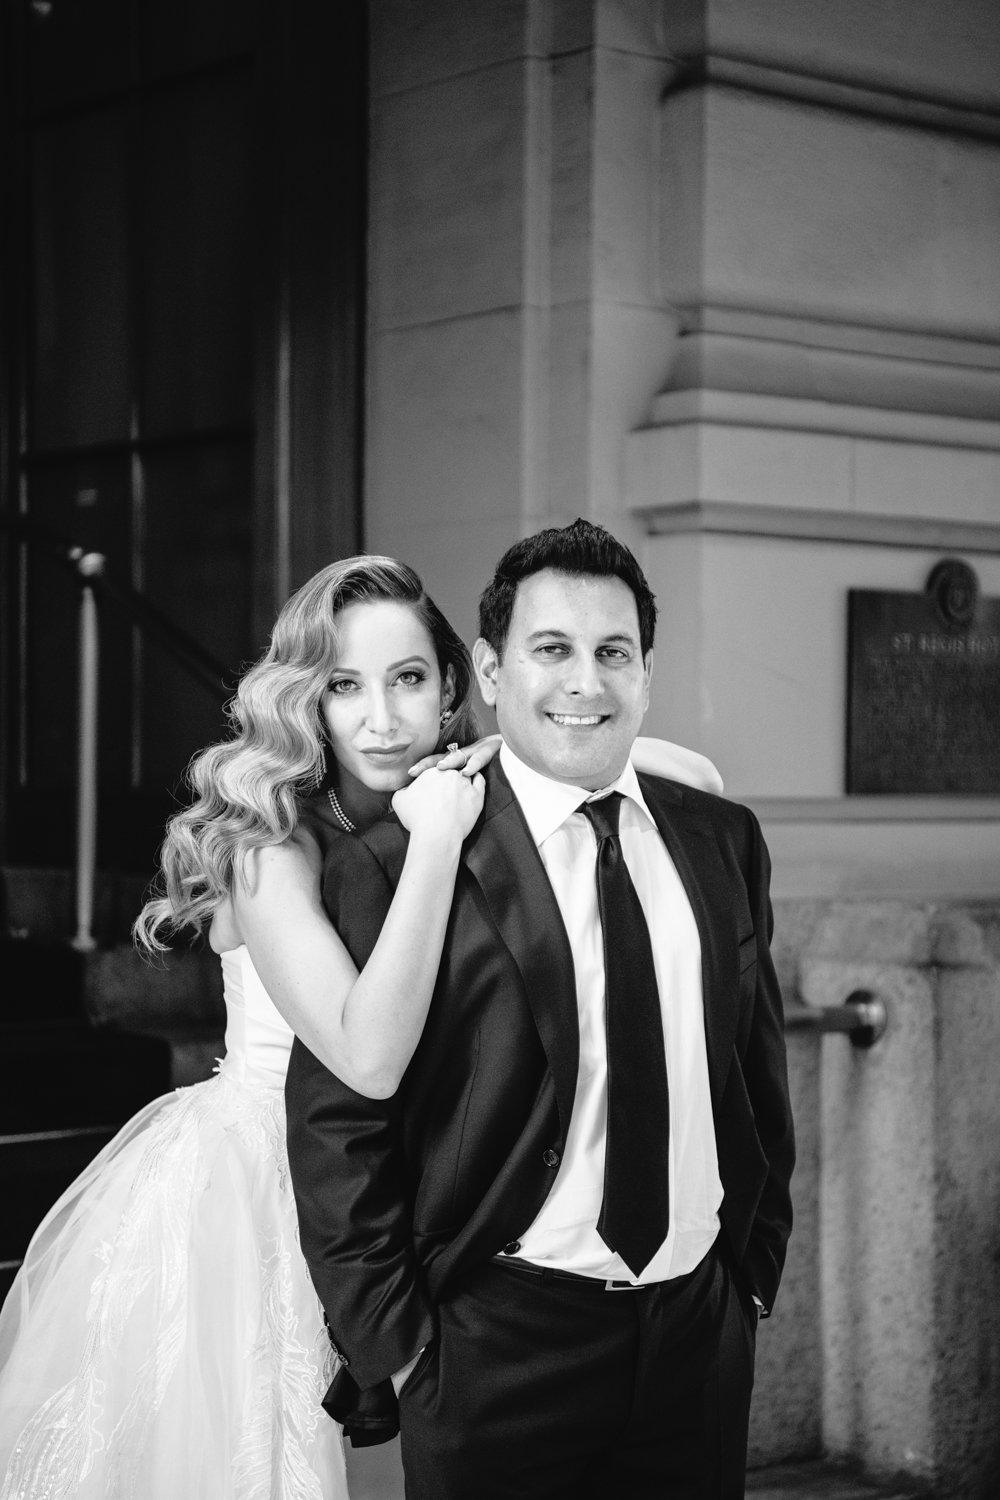 Bride and groom stand outside the St. Regis in Manhattan. The bride is standing behind the groom with her arms leaning on his shoulders.

Manhattan Luxury Wedding. New York Luxury Wedding Photographer. Wedding in Manhattan. NYC Luxury Wedding. Manhattan Bridal Portraits.